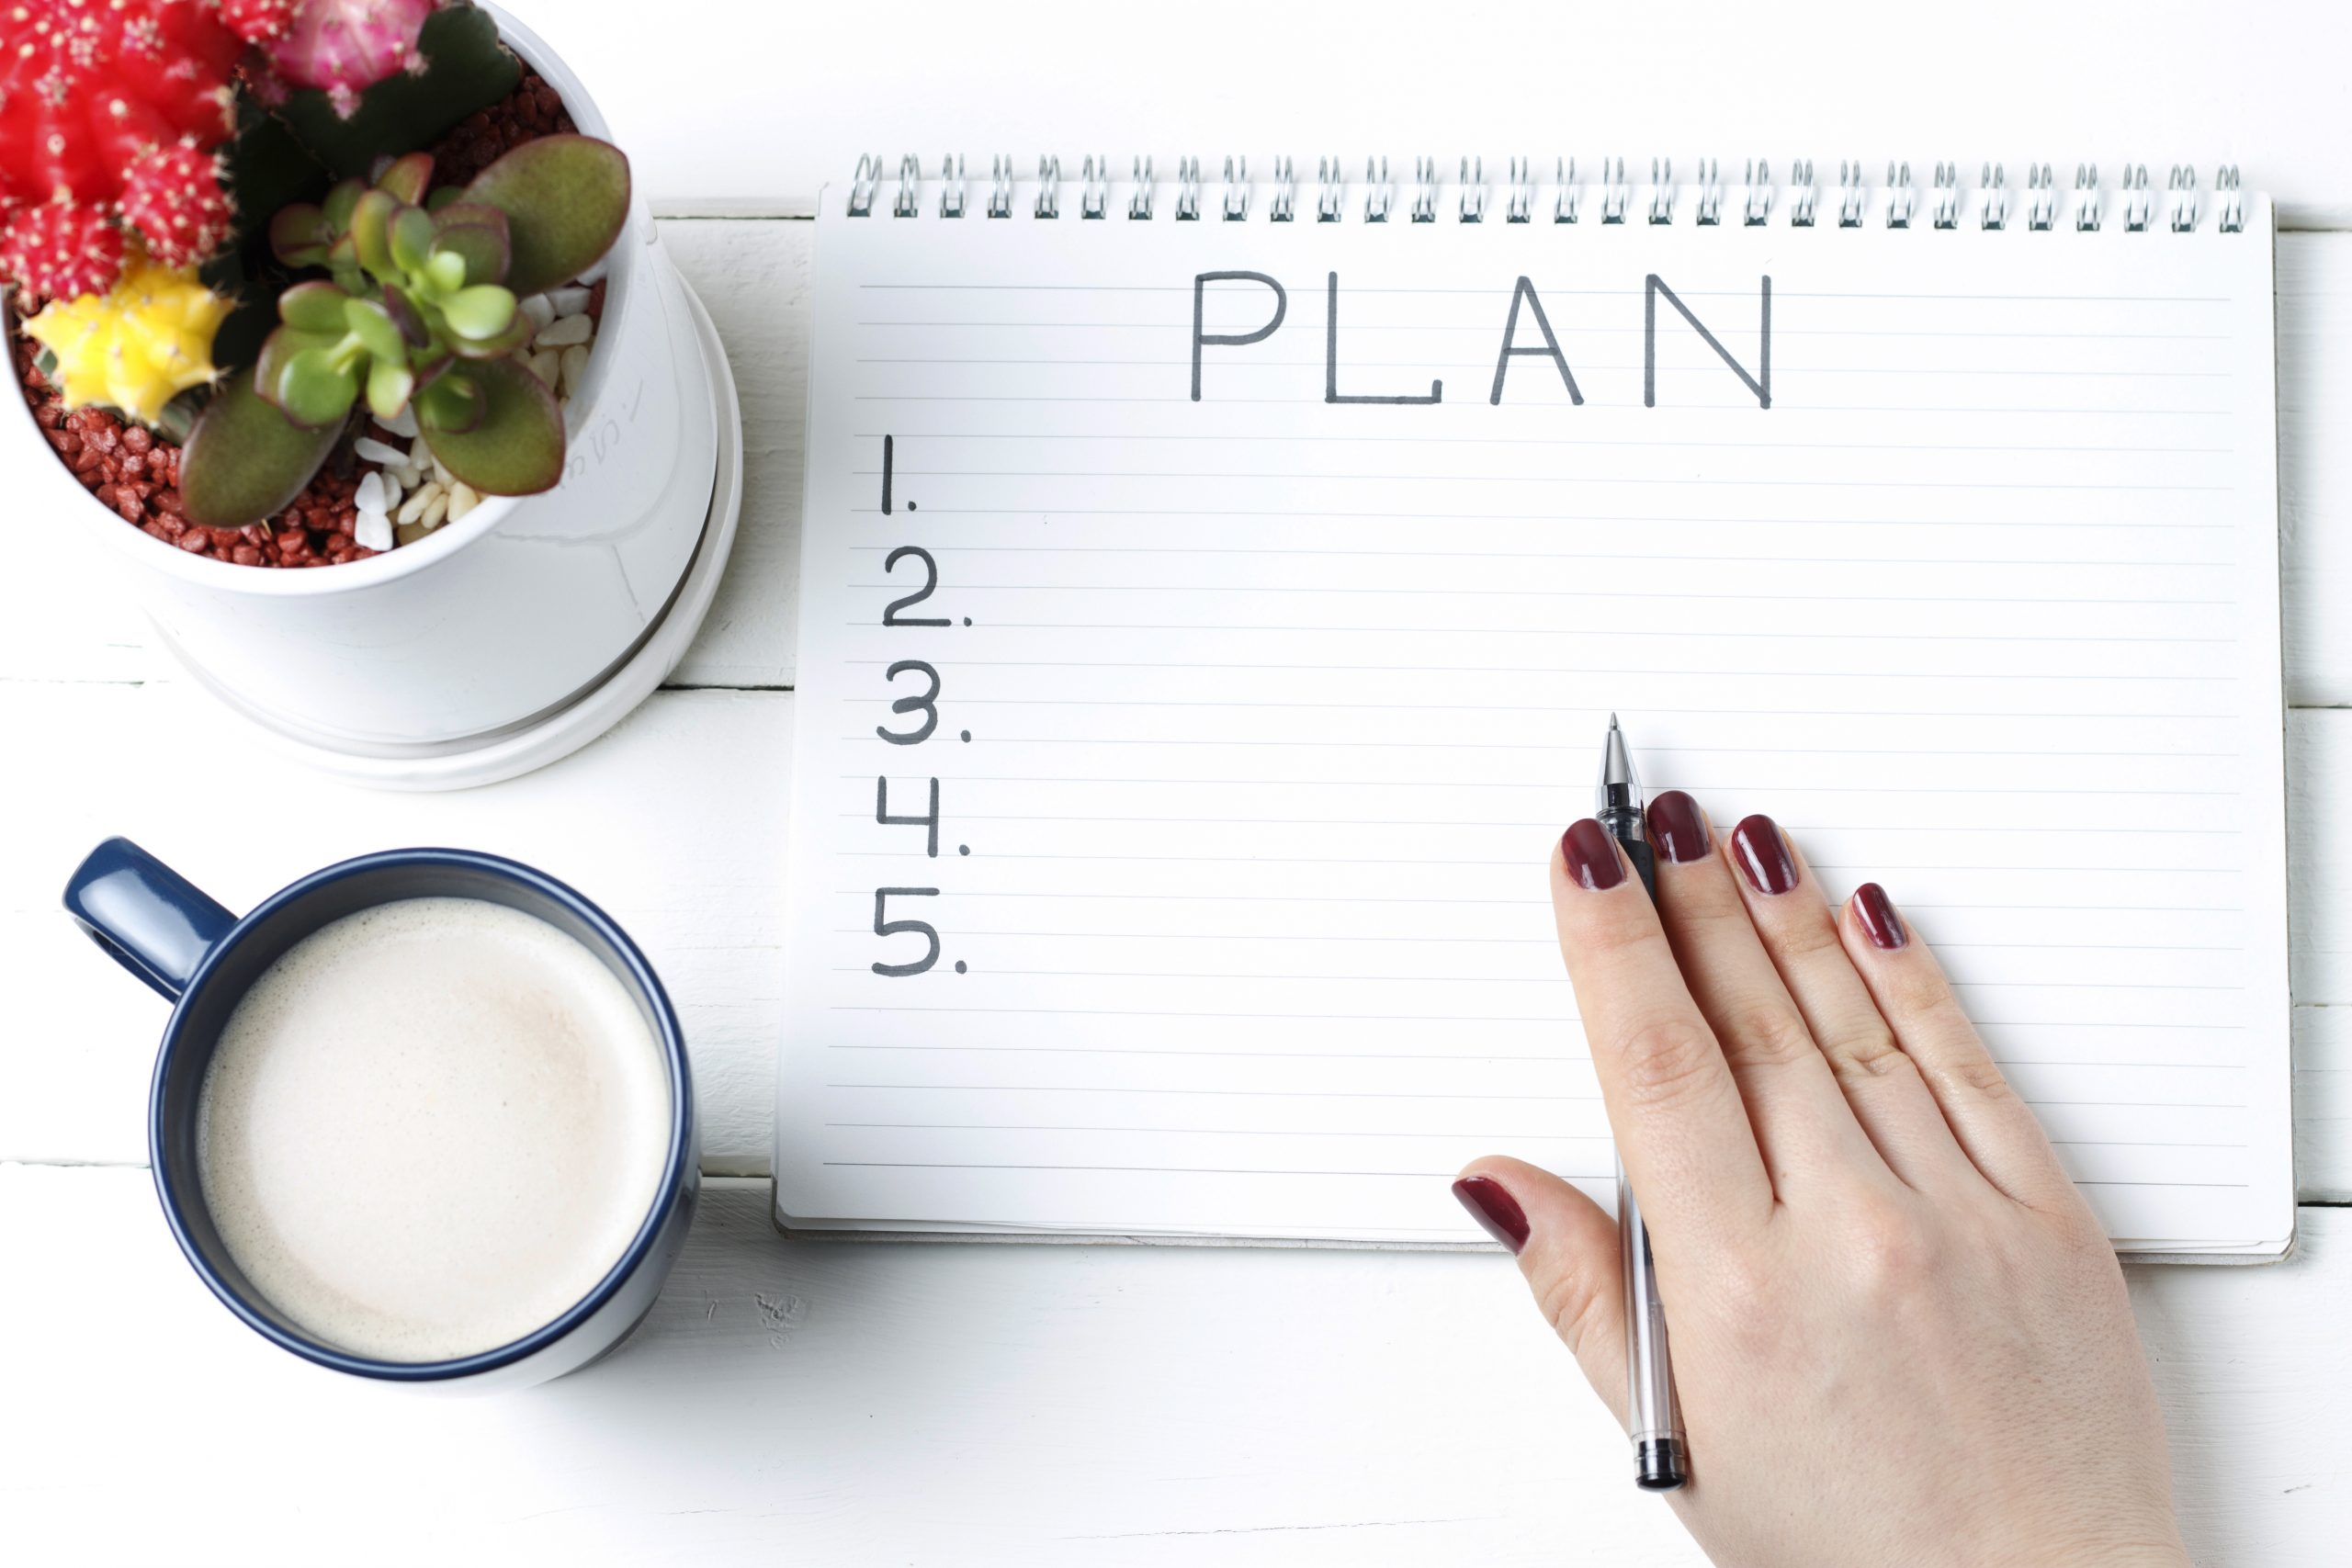 Inscription Plan in notepad, close-up, top view, concept of planning, goal setting